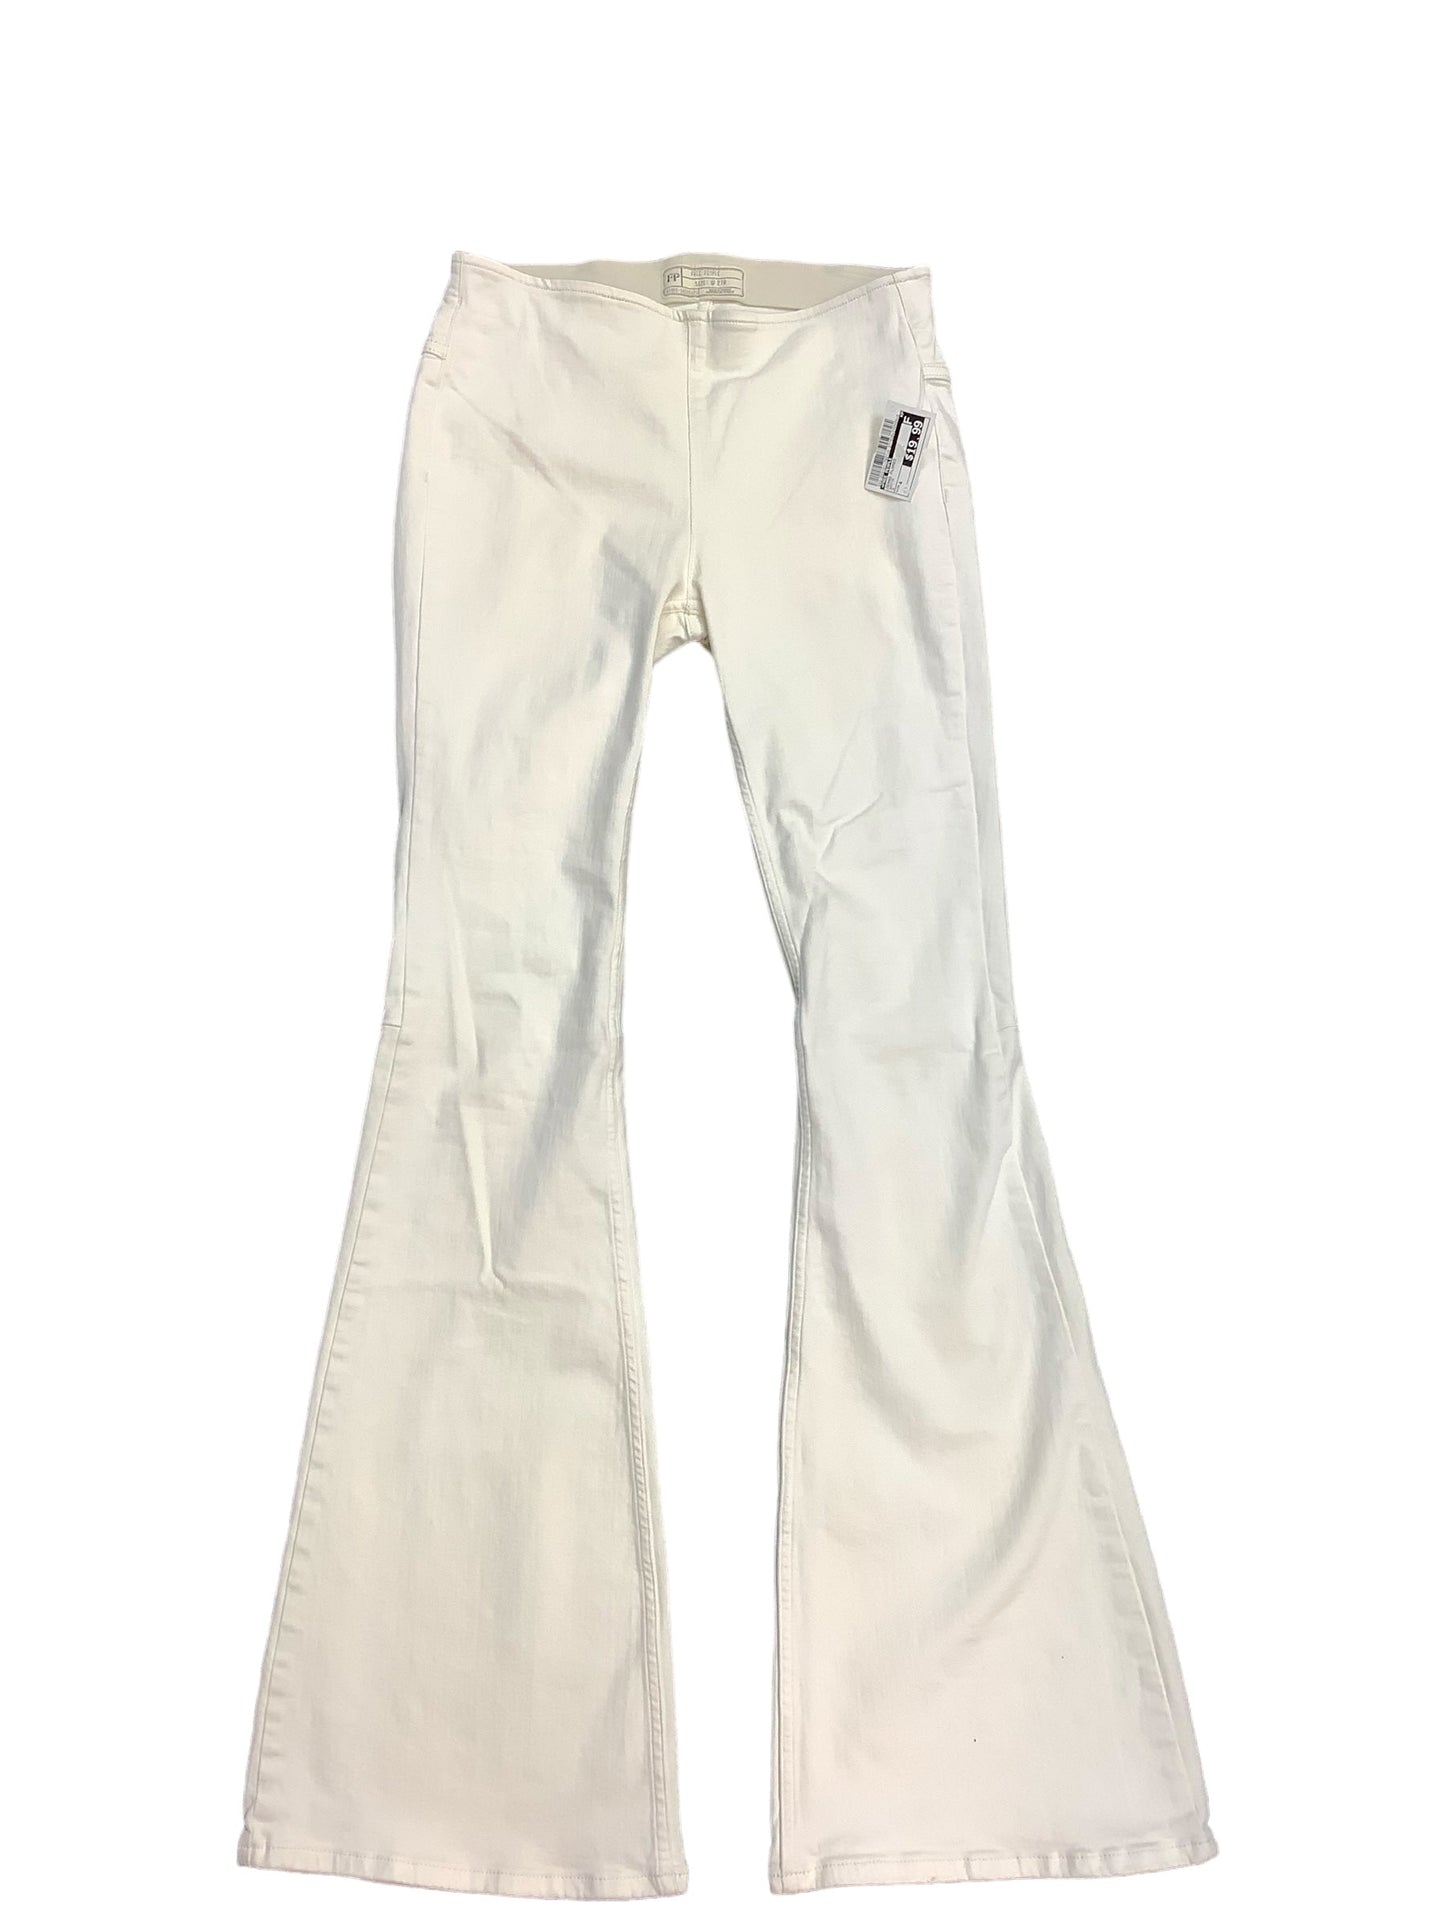 White Jeans Flared Free People, Size 4